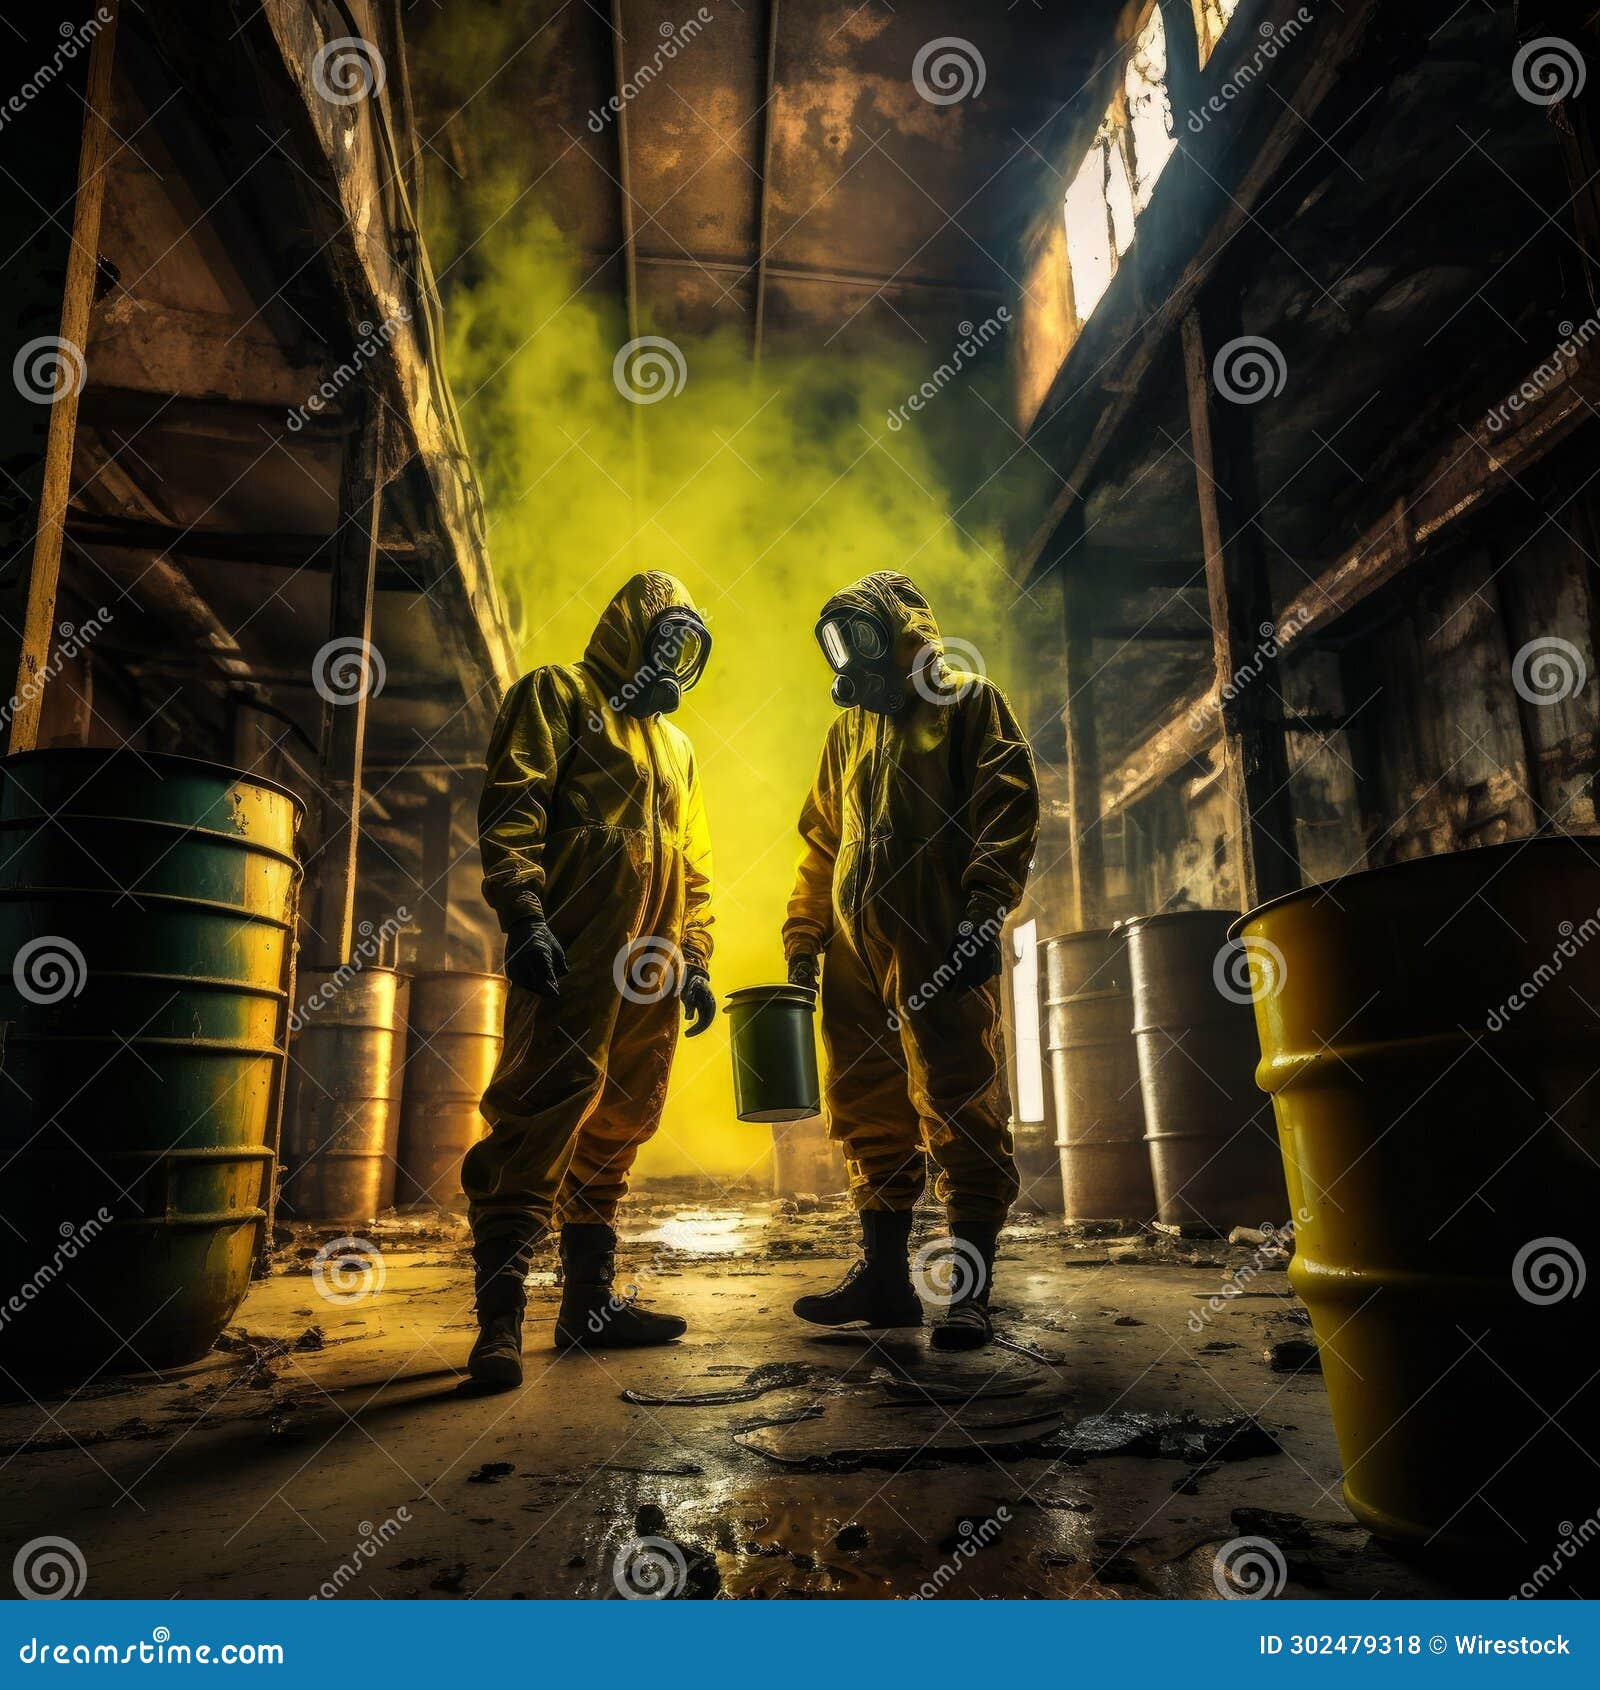 scientists - workers in chemical protective suits examine chemical barrels in an old warehouse - dep